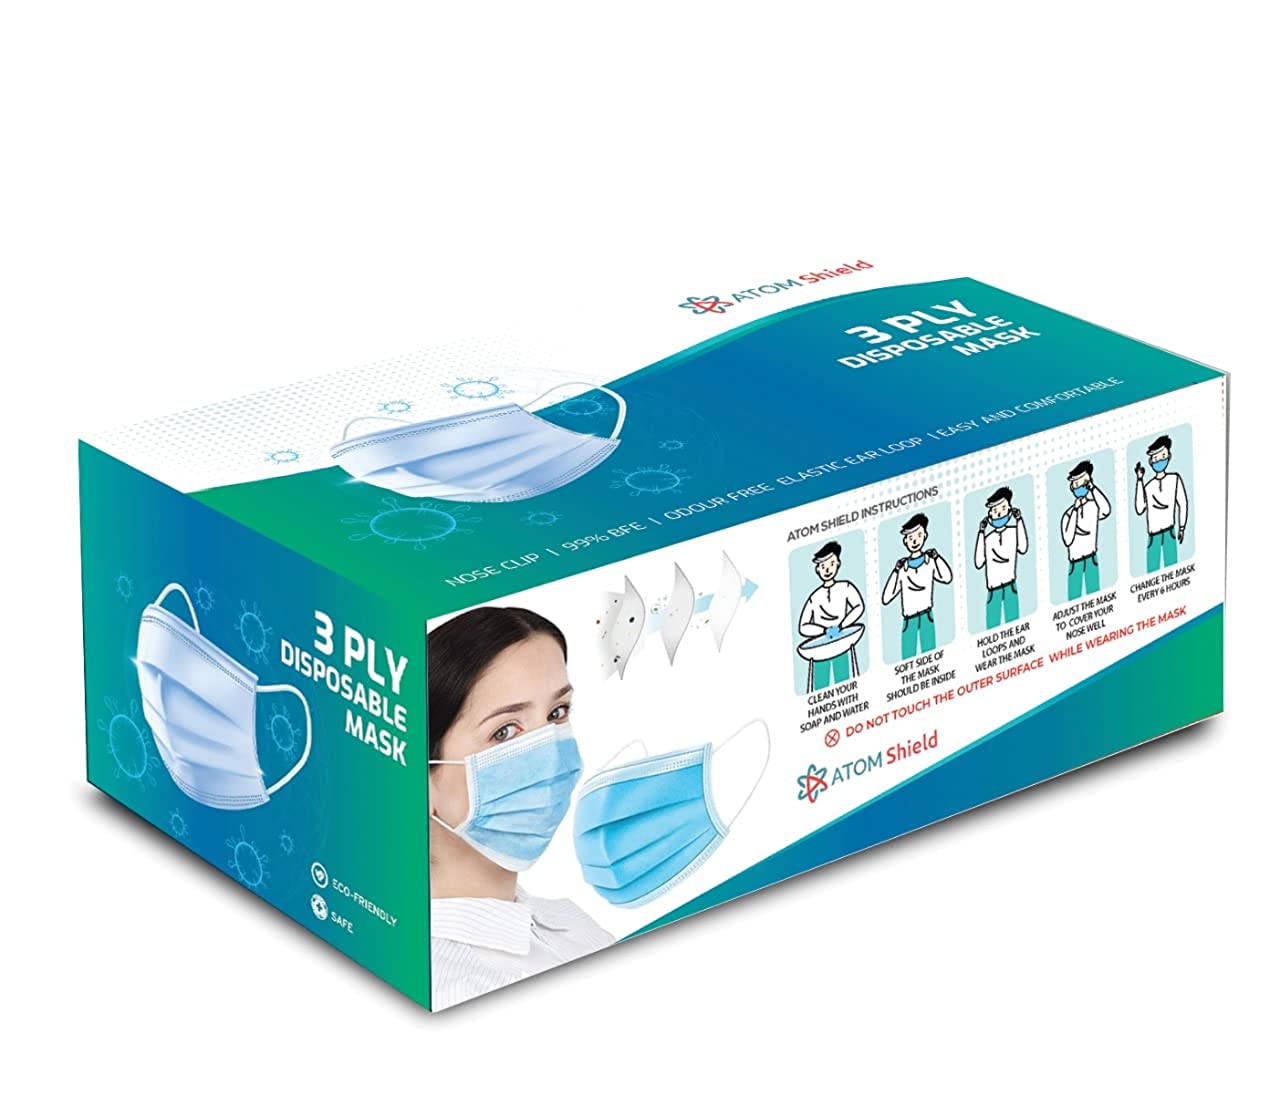 Dr Trust Digital BP Monitor with FREE 1 Box of 50s 3 Ply surgical disposable Mask